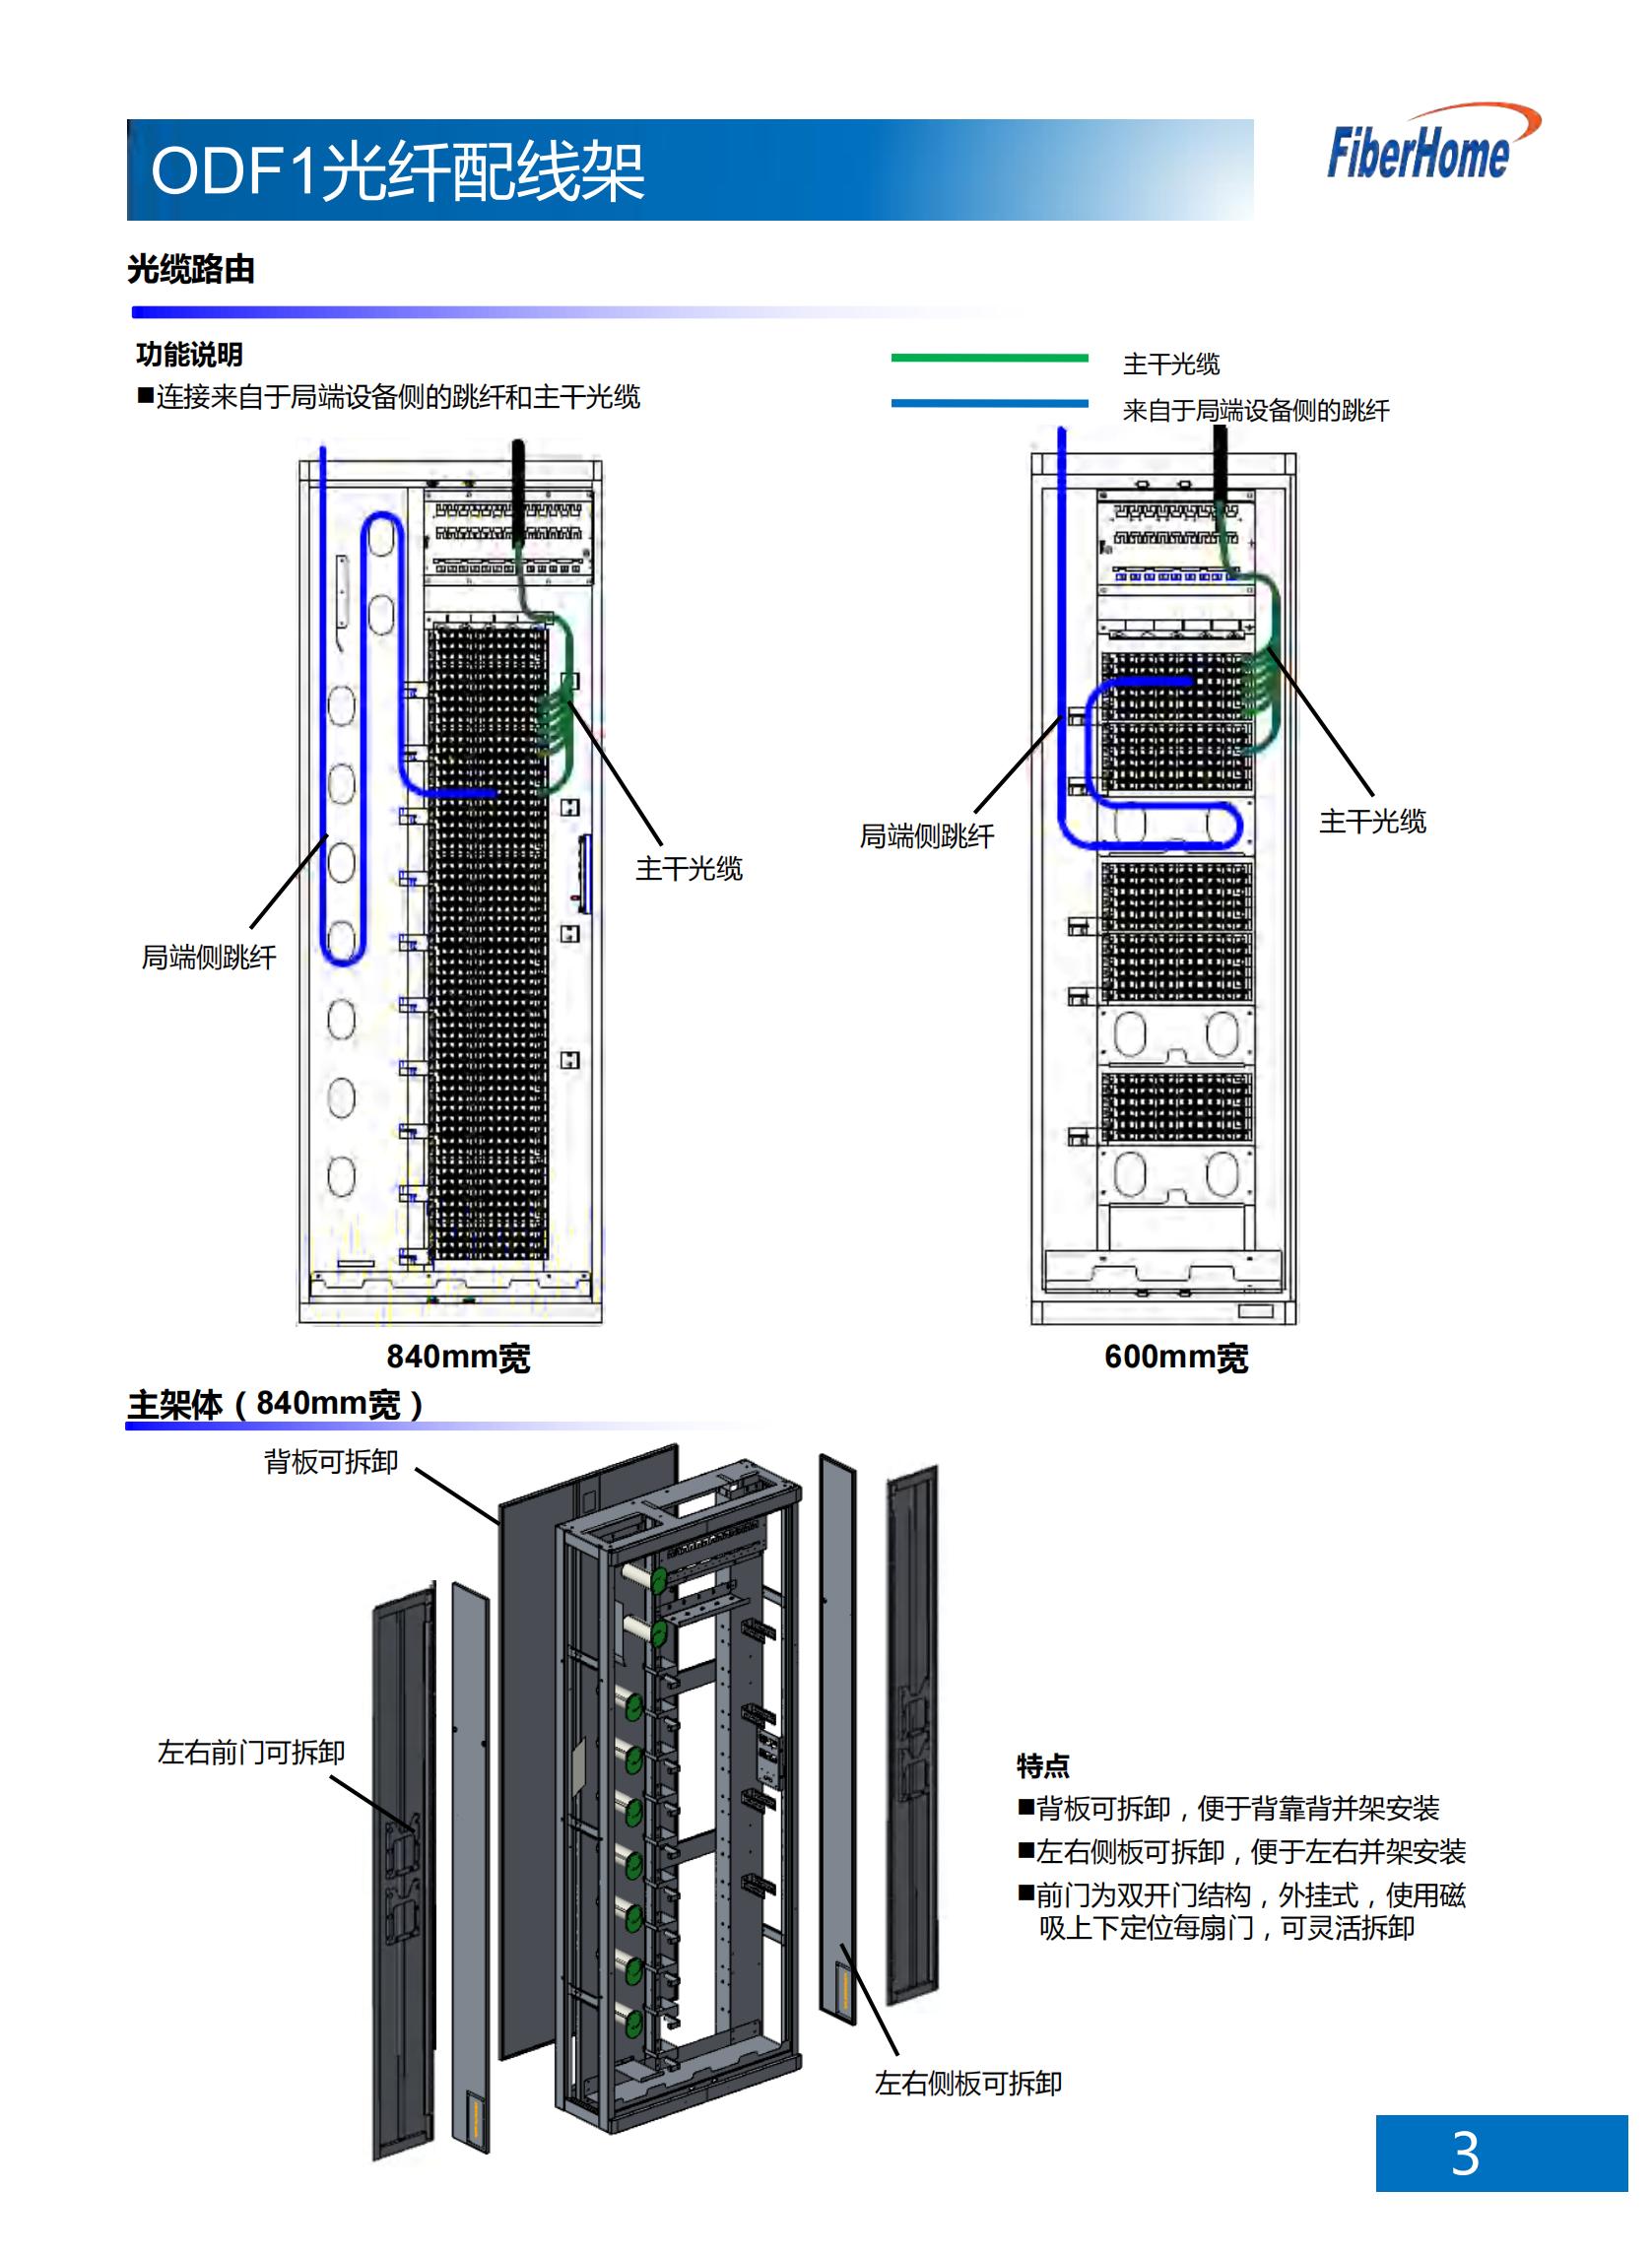 ODF101-1008-A5-LC ODF optical fiber distribution frame (504-core floor-standing all include 24-core LC fusion integration unit)